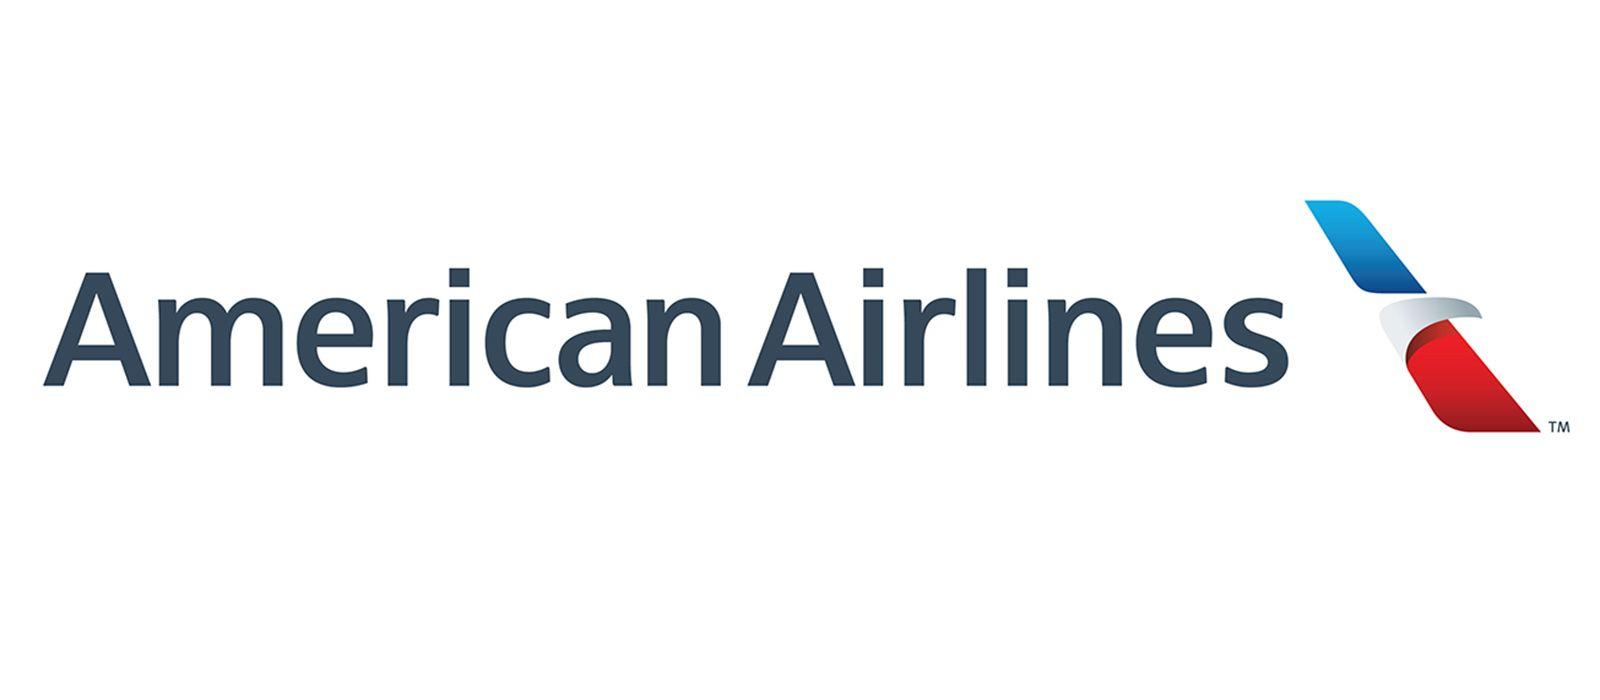 New AA Logo - American Airlines debuts new, modern look. Corporate Identity Portal